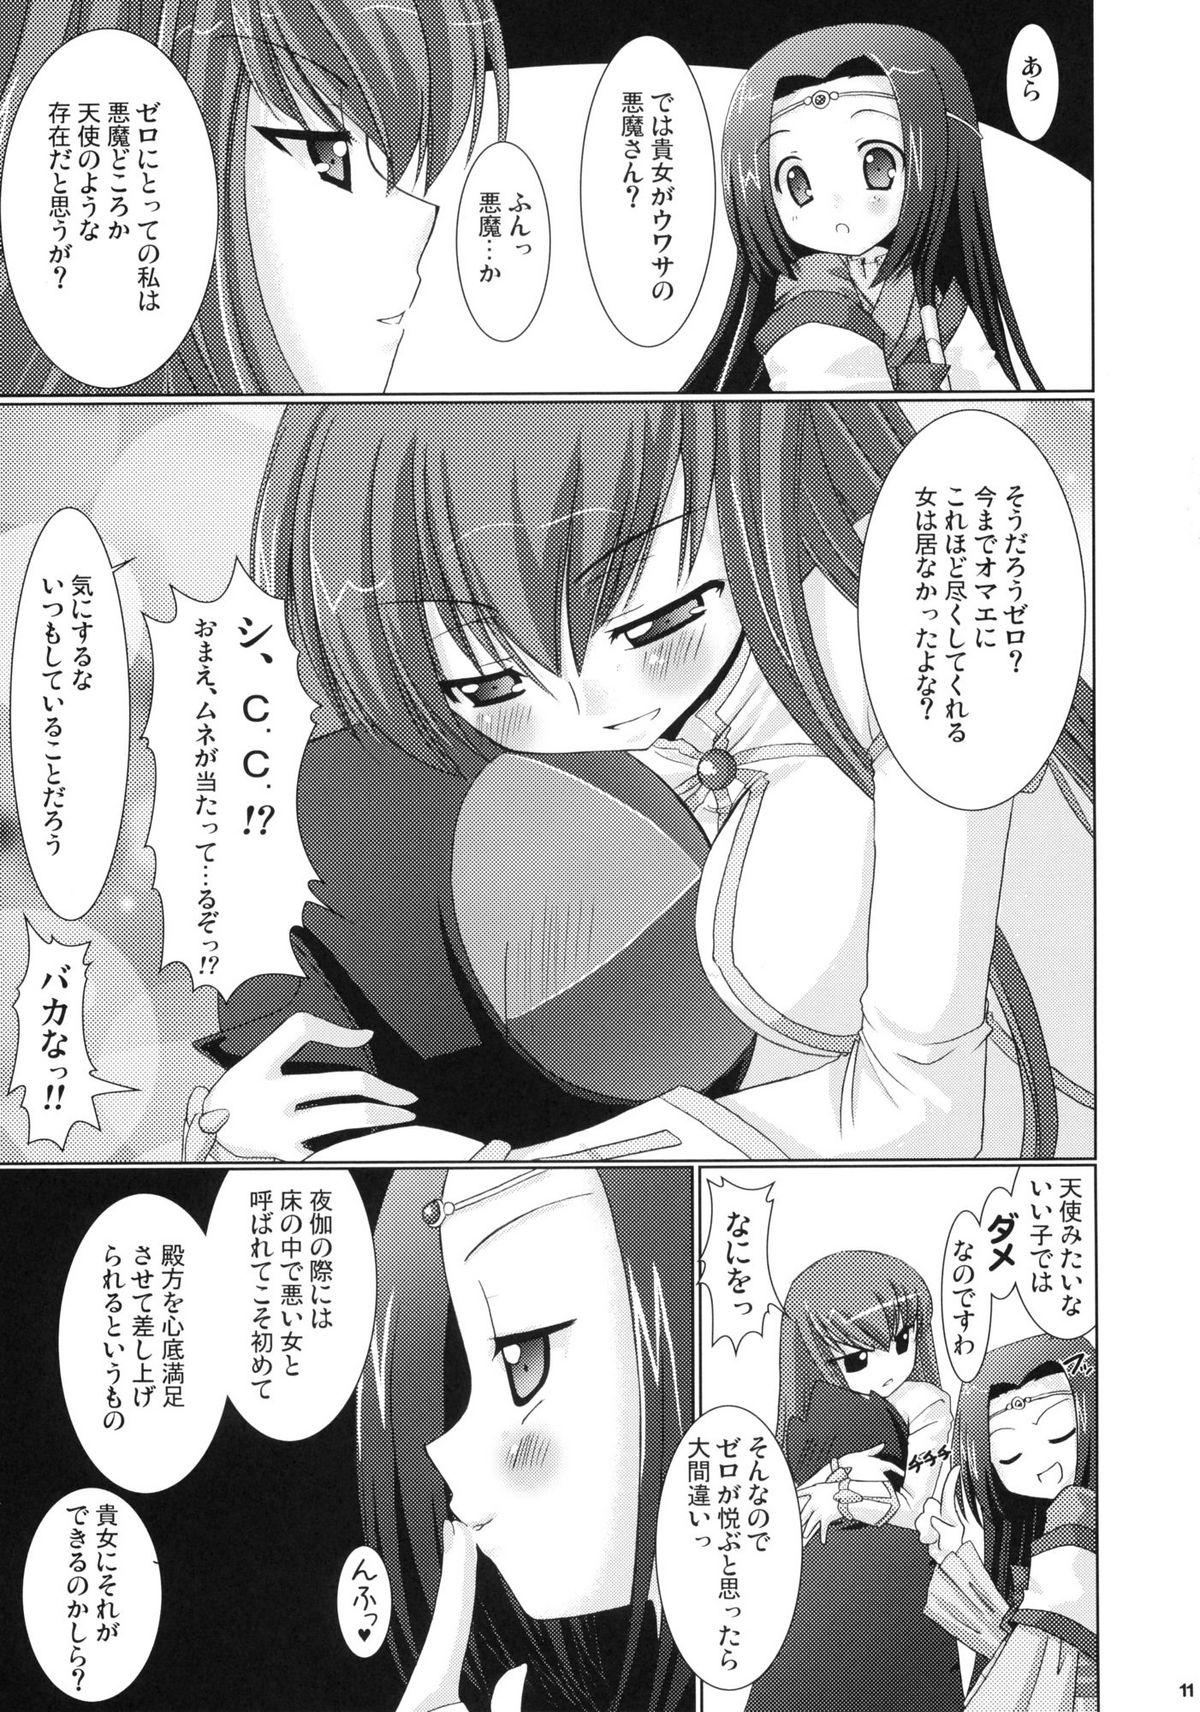 Secret Kouhime Kyouhime - Code geass Spooning - Page 11